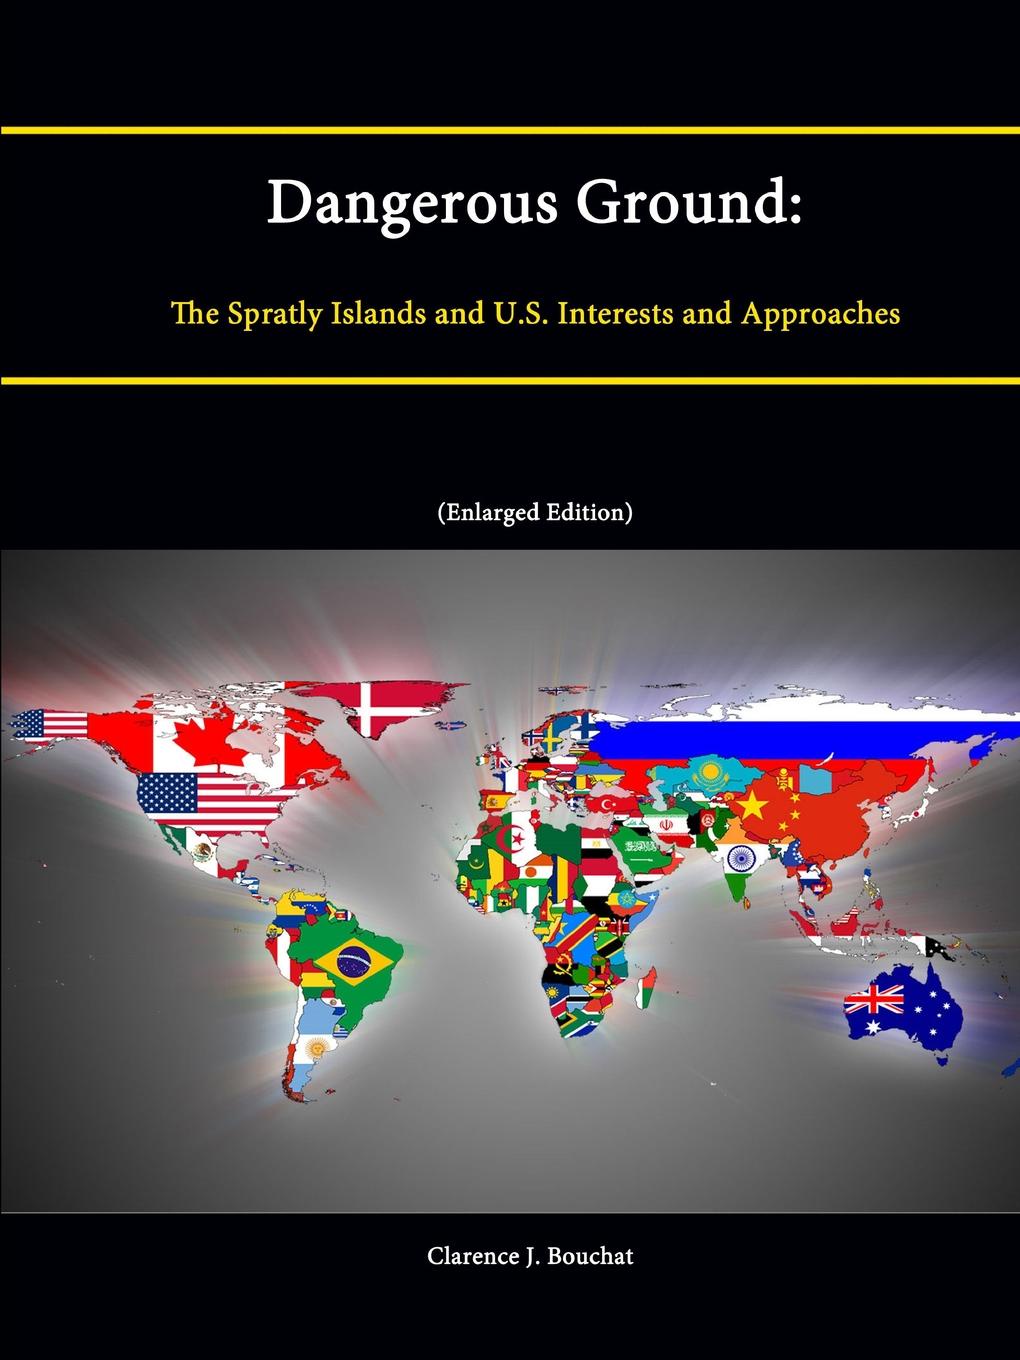 Dangerous Ground. The Spratly Islands and U.S. Interests and Approaches (Enlarged Edition)